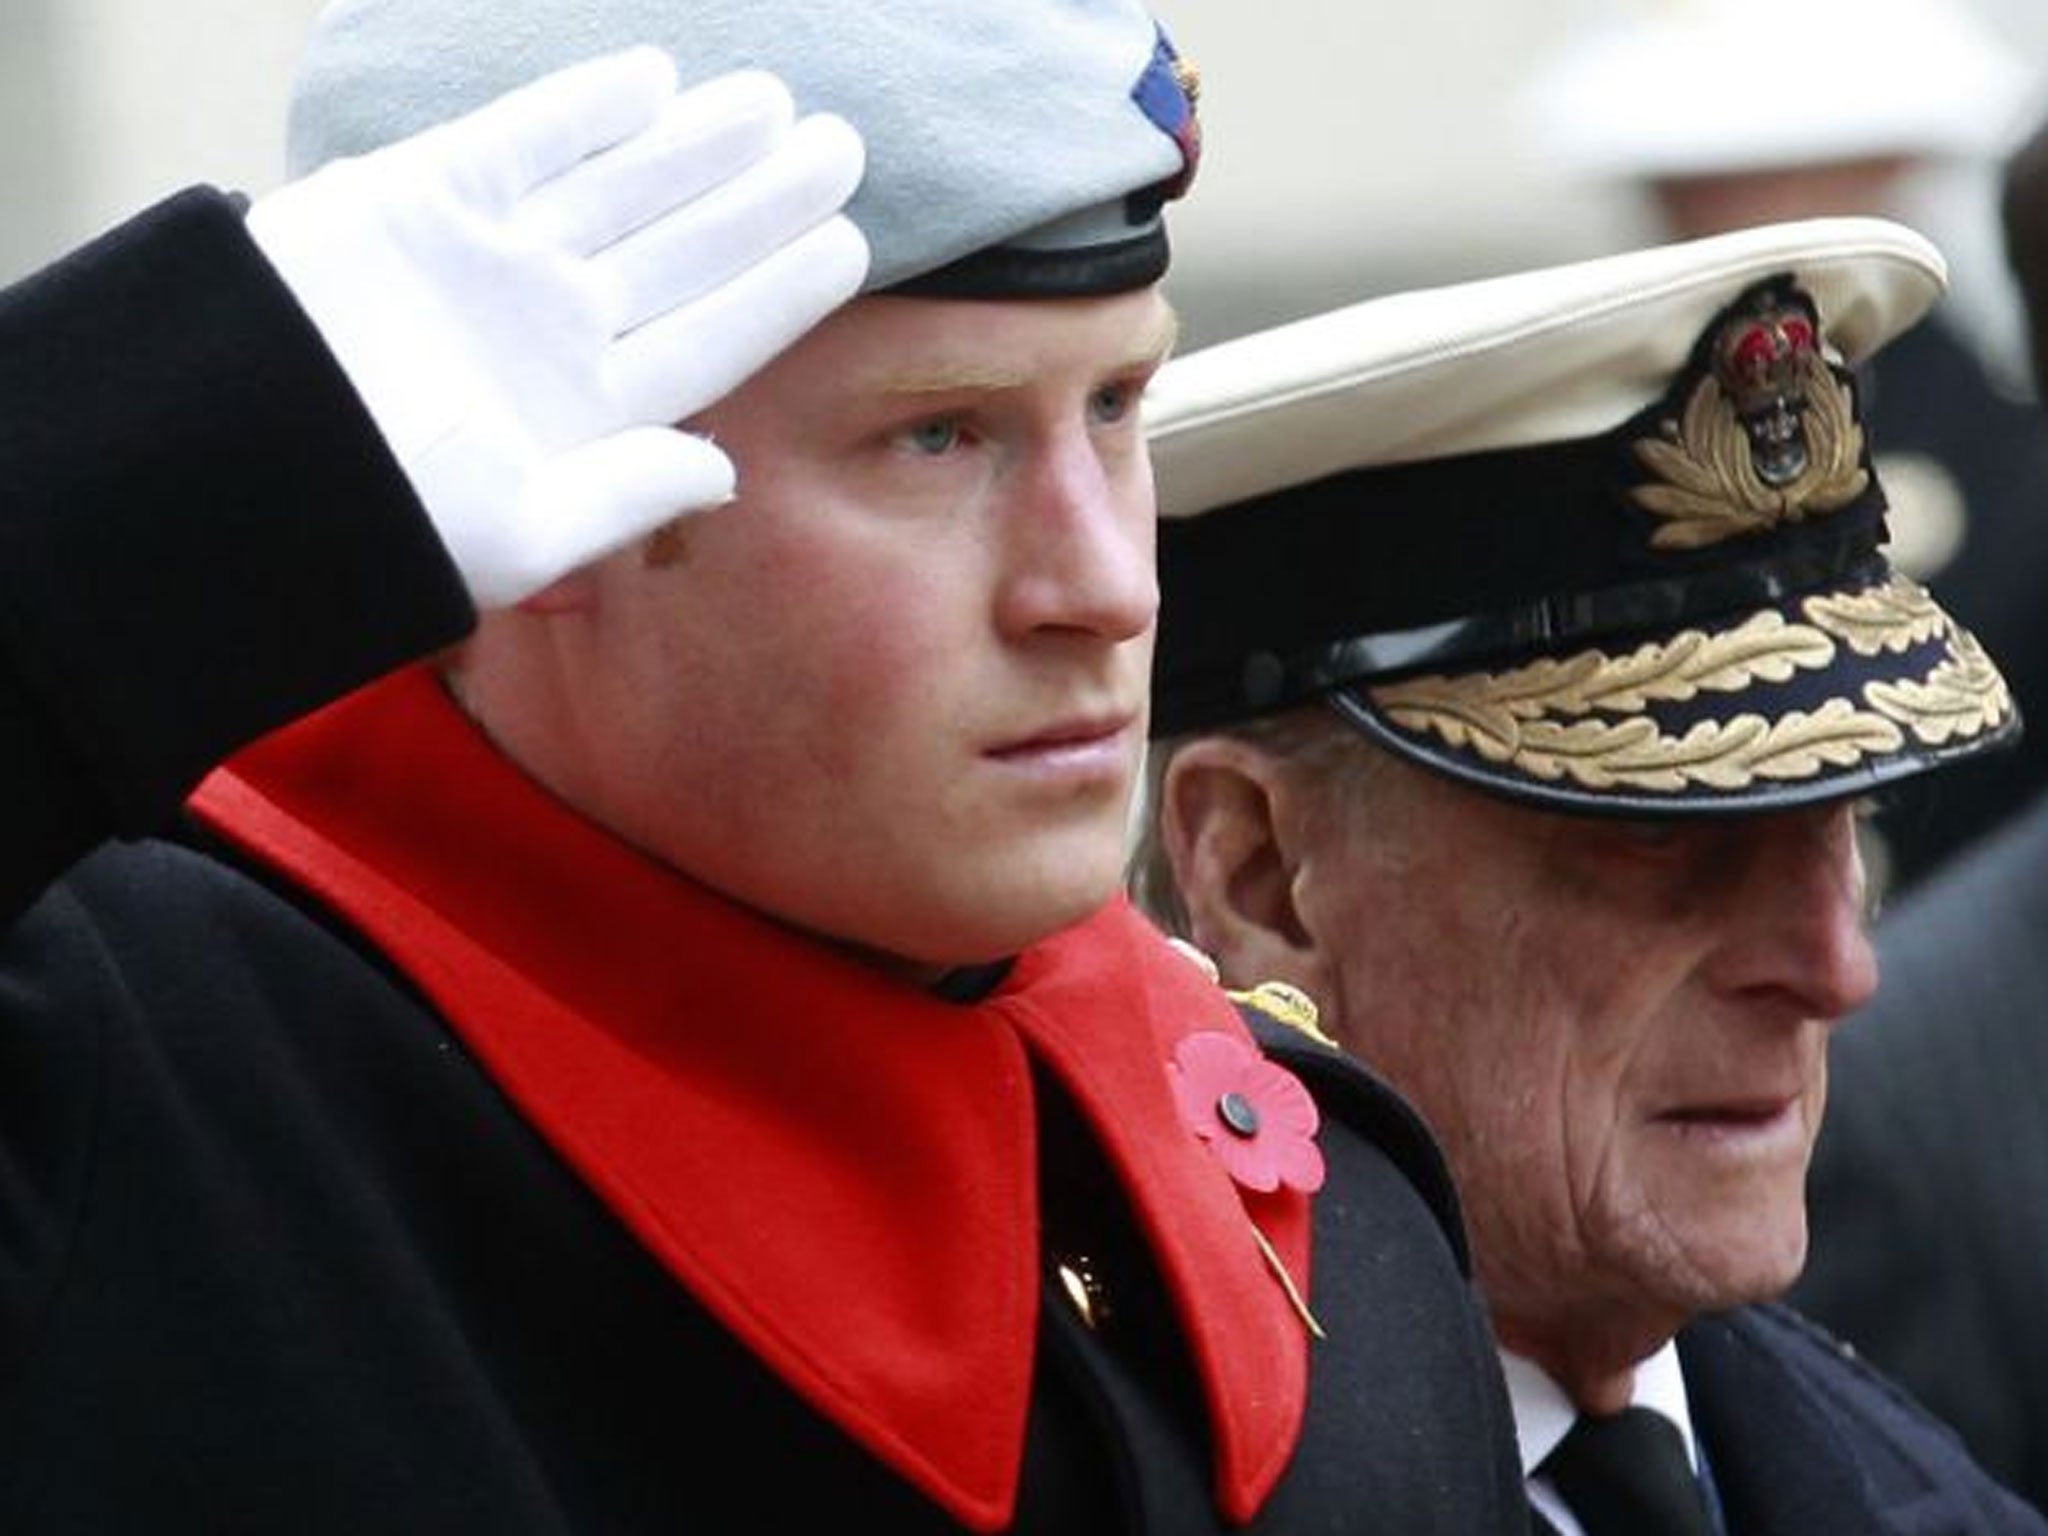 7 November 2013: Prince Harry salutes as he stands with Prince Philip during a visit to the Field of Remembrance at Westminster Abbey. The field commemorates Britain's war dead with crosses and poppies ahead of Remembrance Sunday